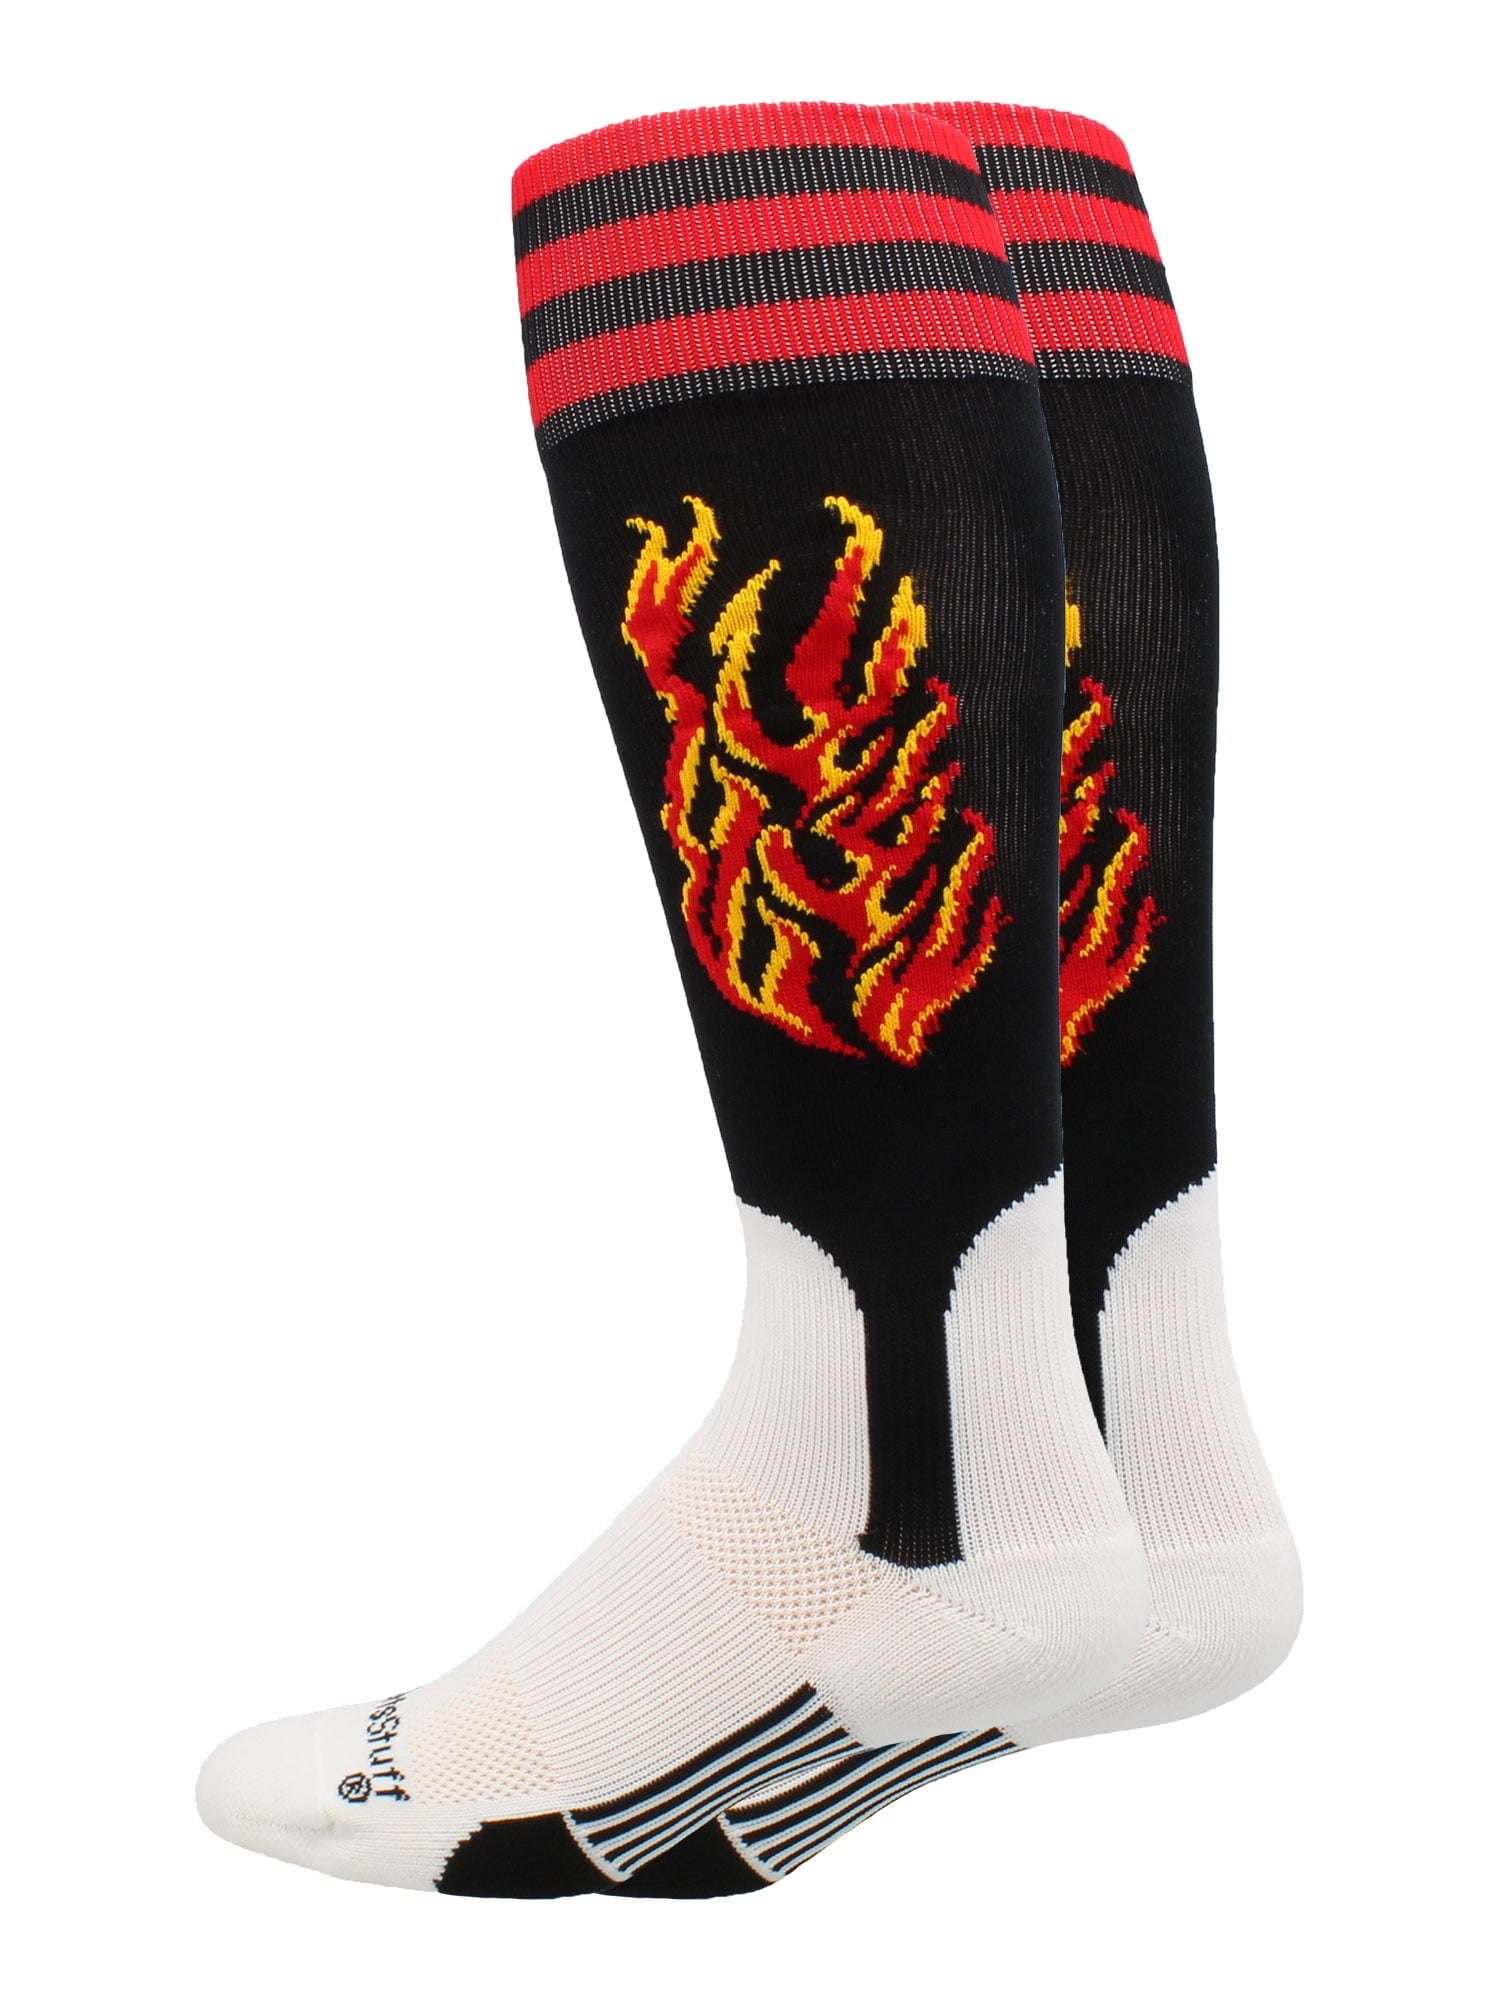 Victory Baseball Socks with Player in Crew Length